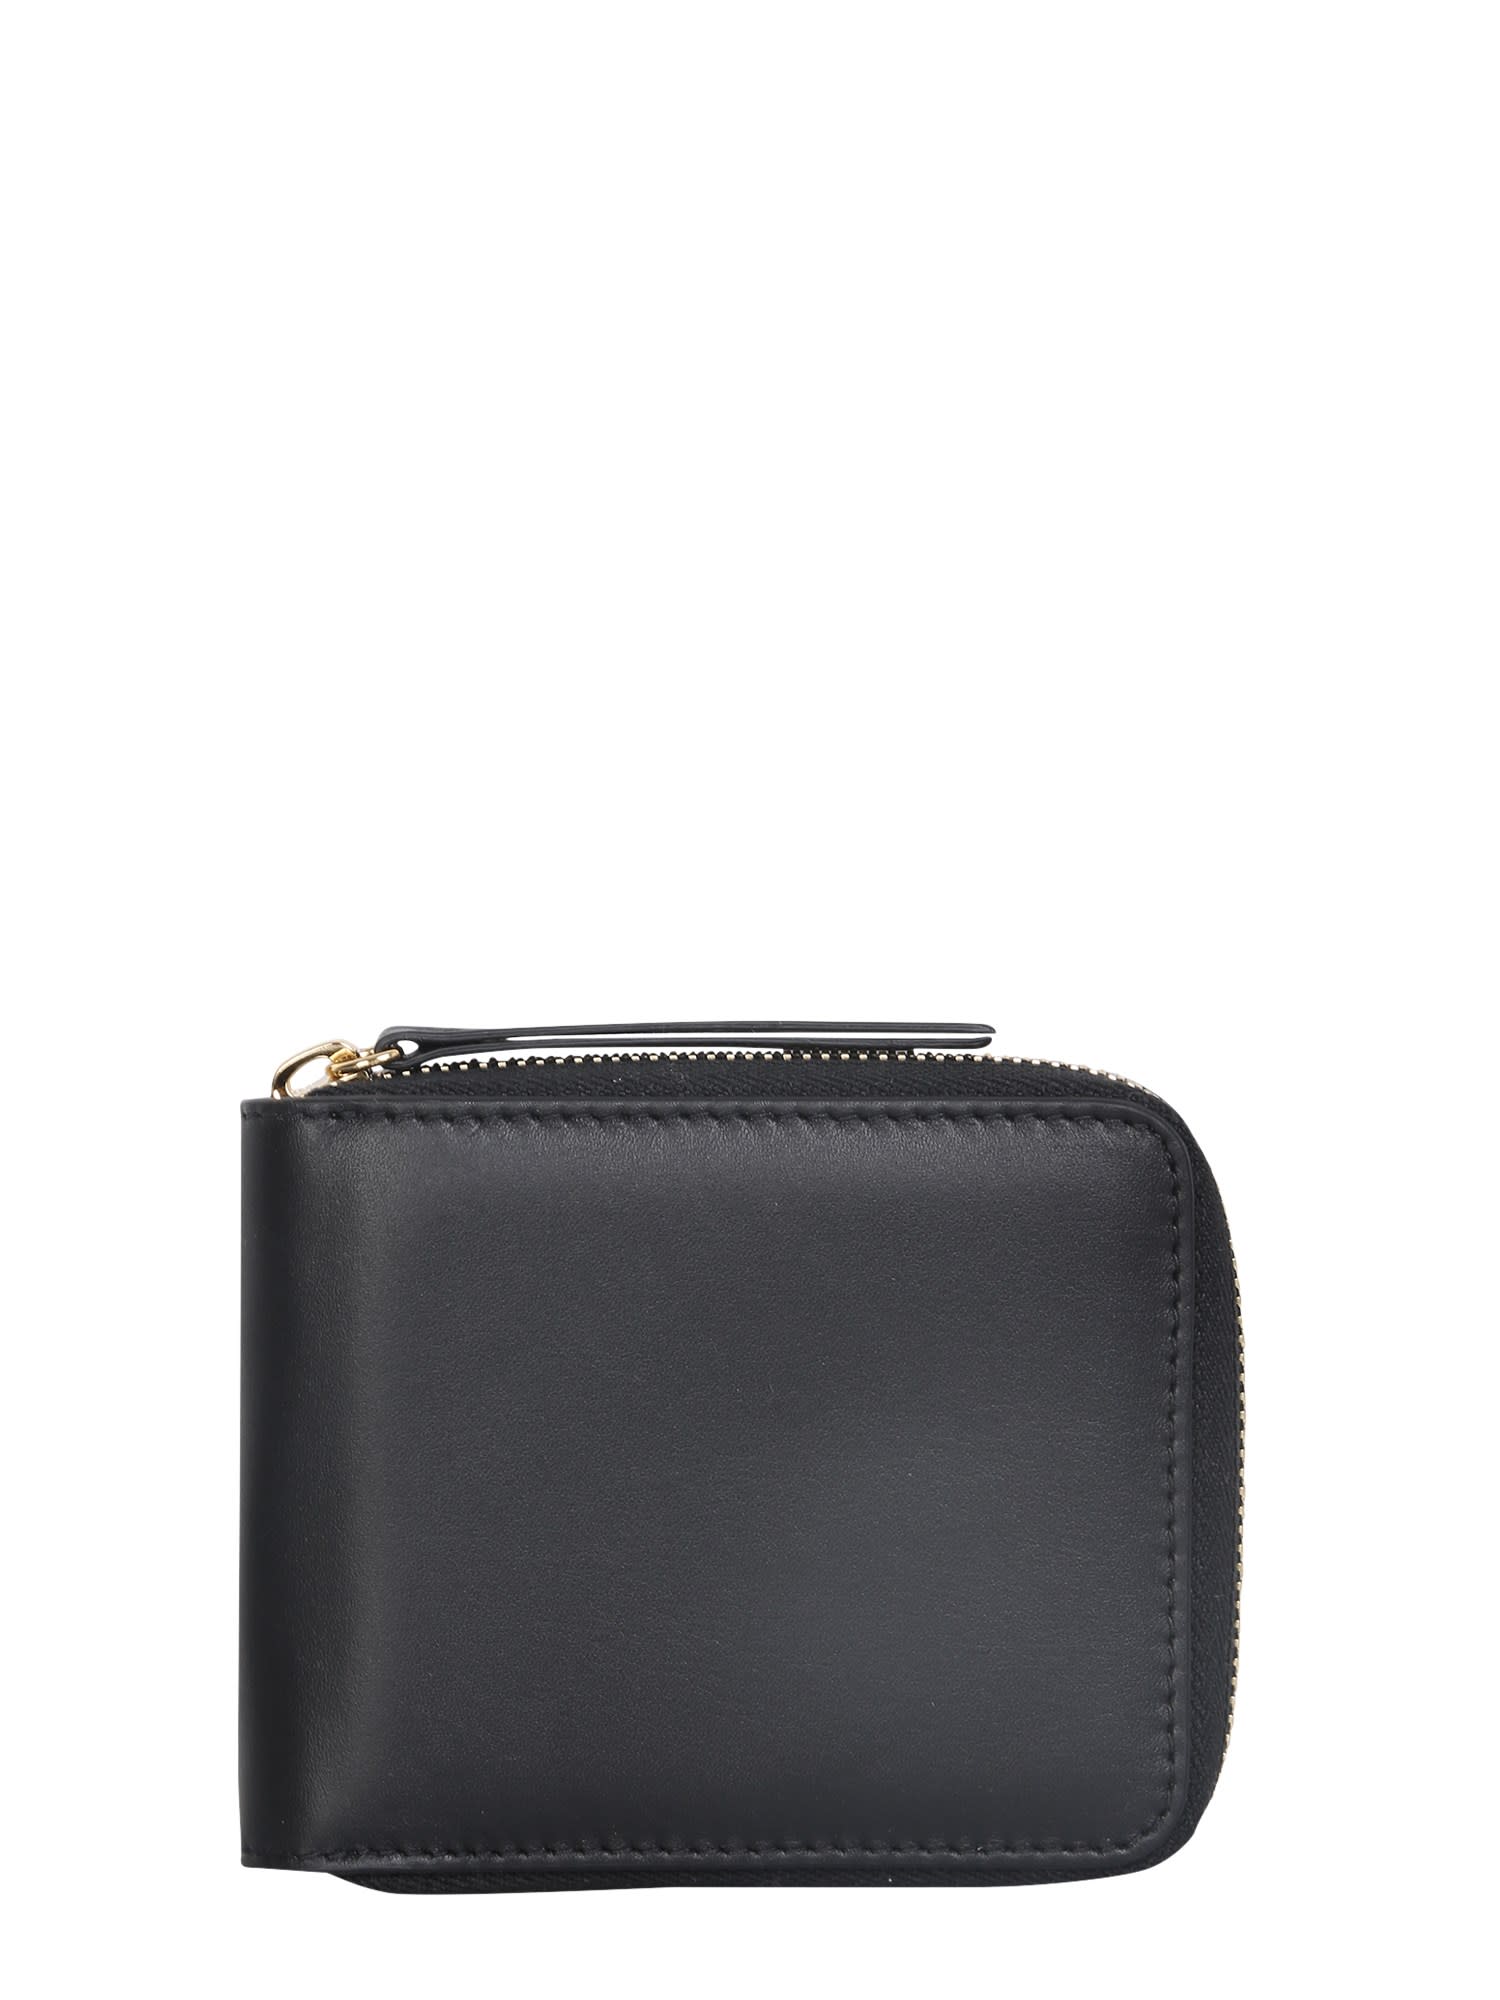 Maison Margiela Leather Wallet With Zip